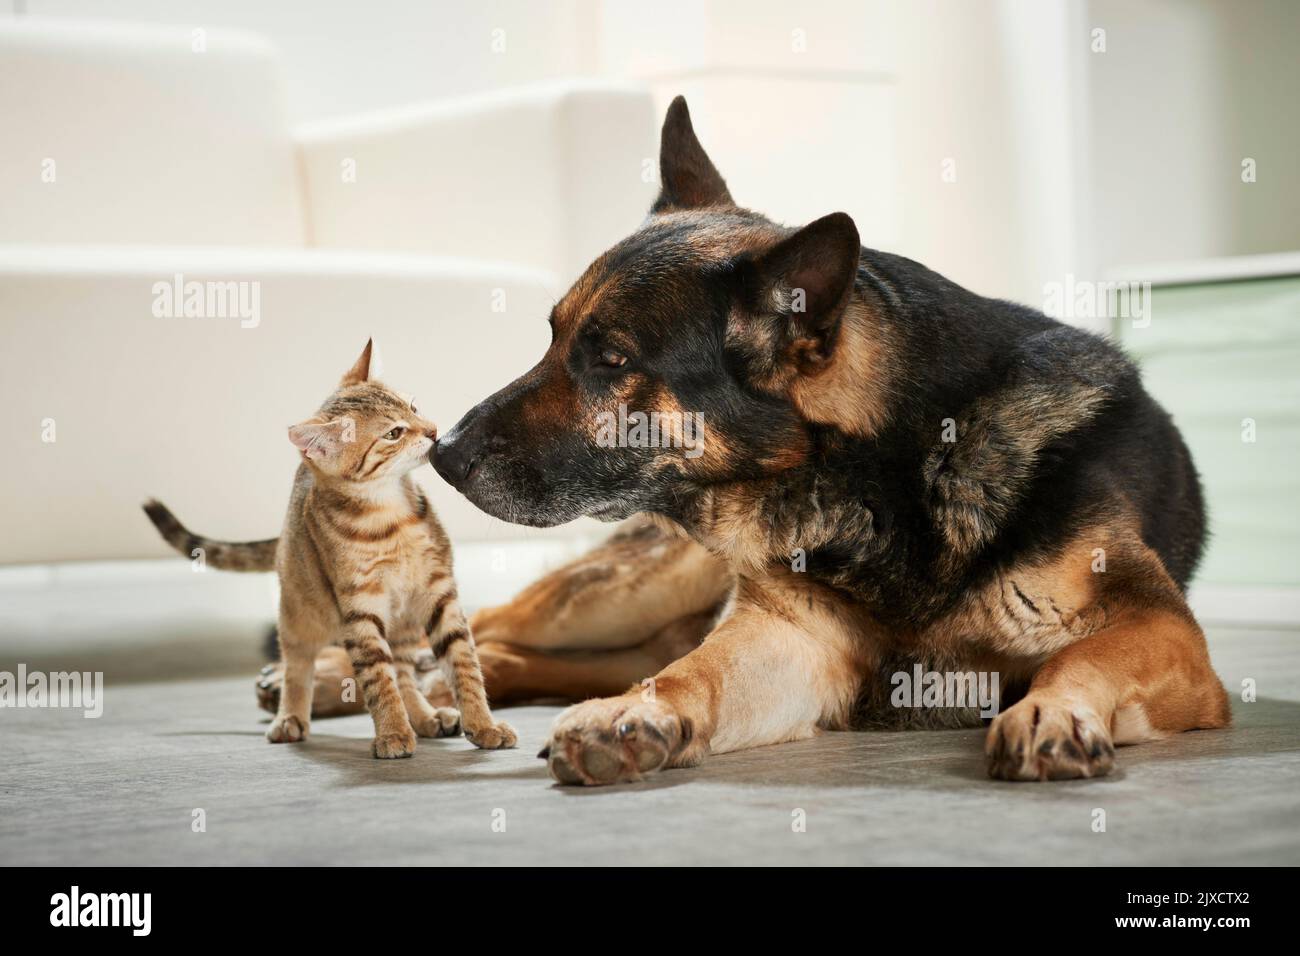 Domestic cat. Tabby kitten and adult German Shepherd dog sniffing each other. Germany Stock Photo